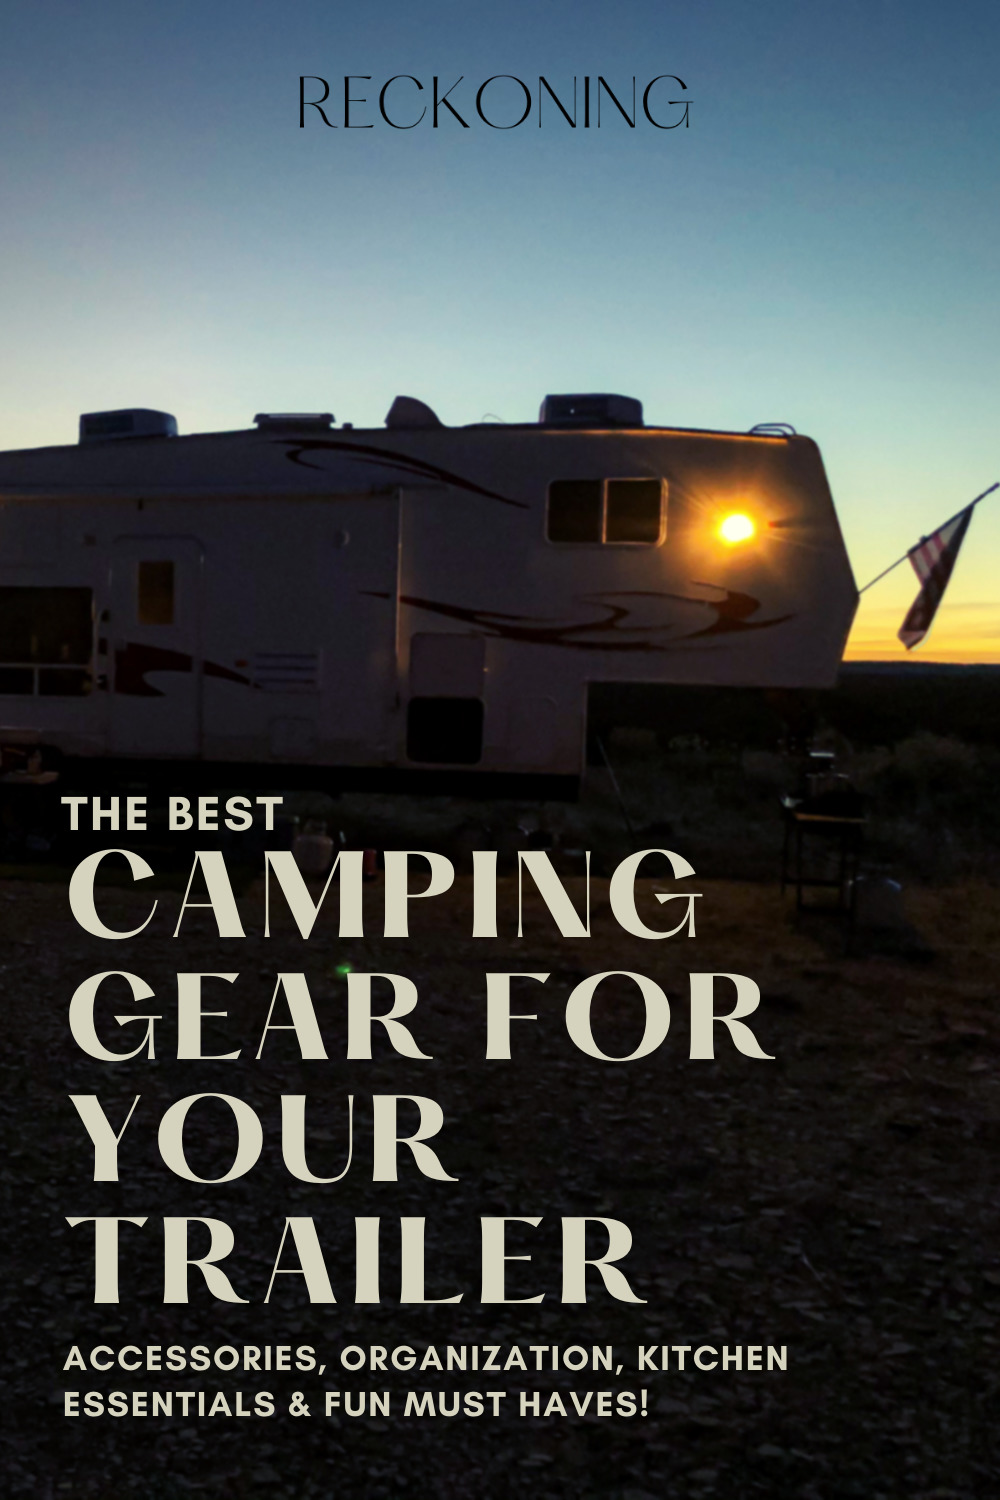 The best camping gear for 2021